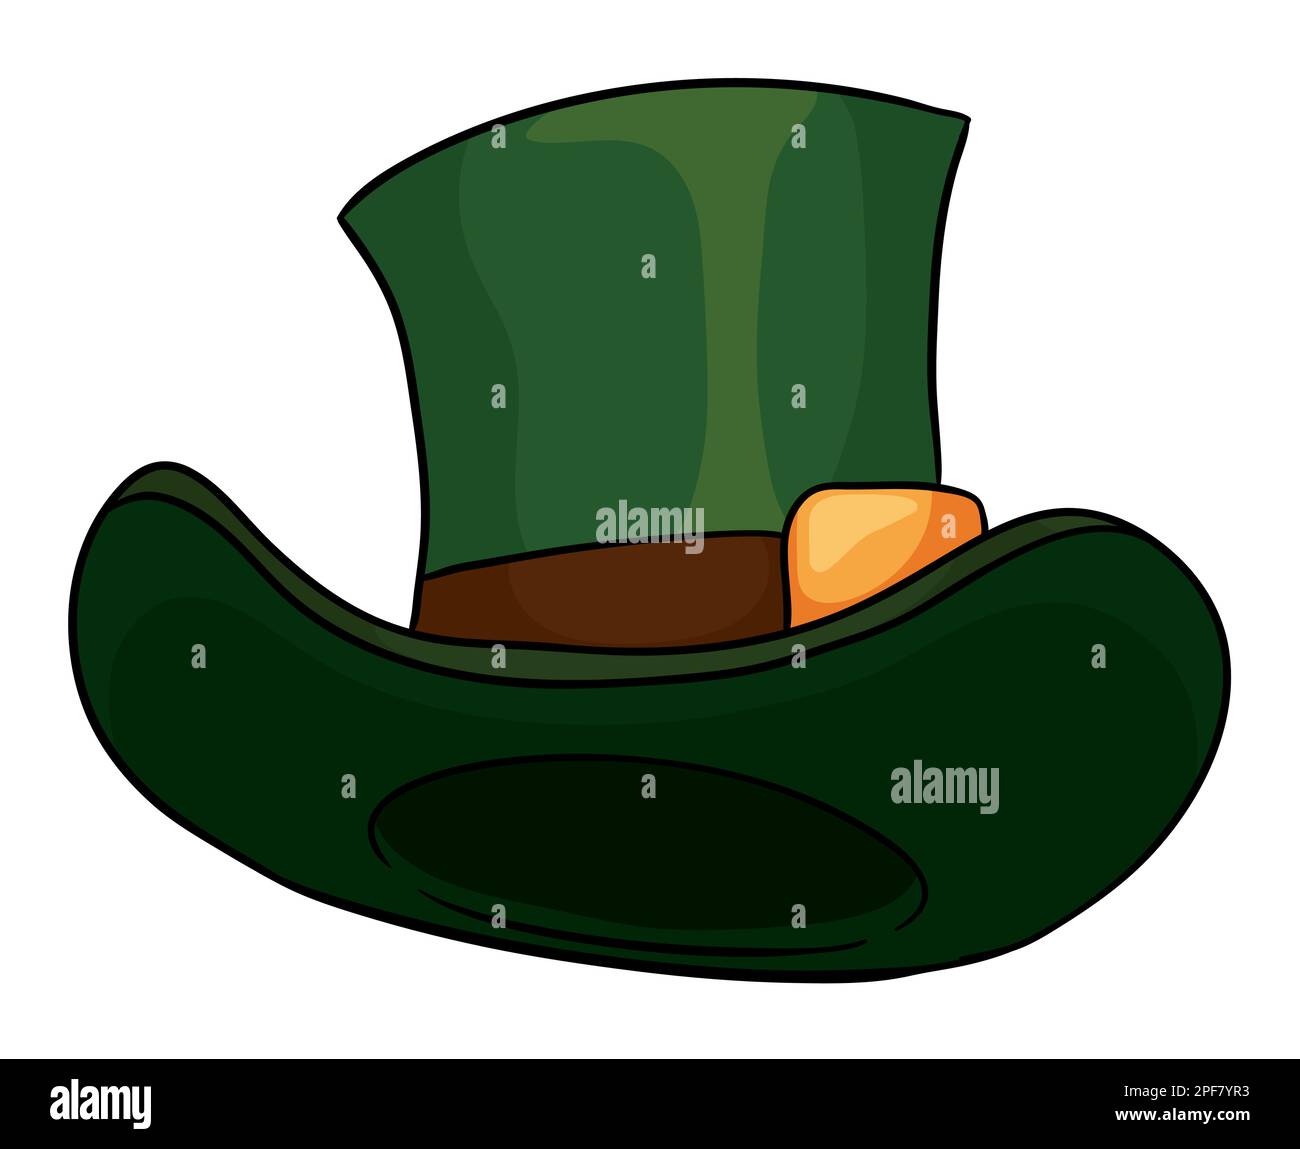 Elegant green top hat with brown band and golden buckle. Design in bottom view and cartoon style with outlines. Stock Vector